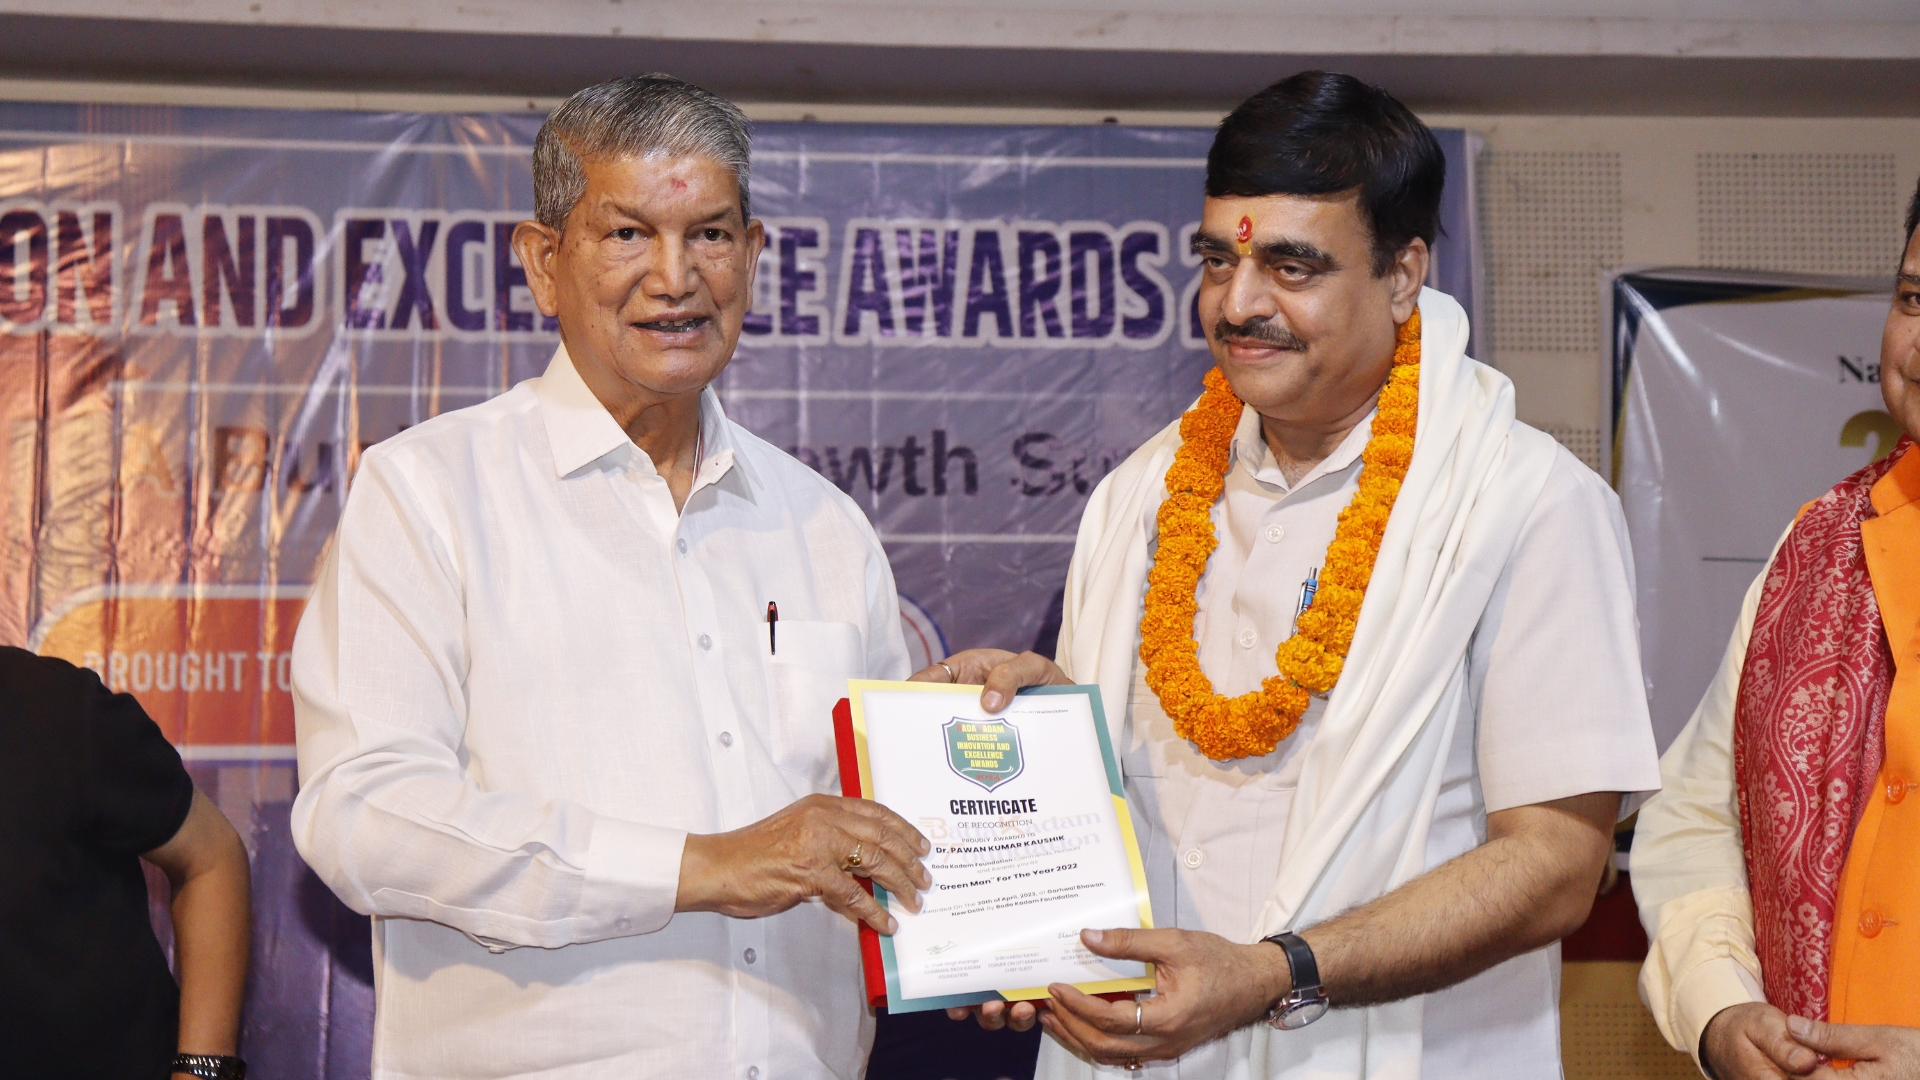 Dr. Pawan Kumar Kaushik is being Awarded by Chief Guest